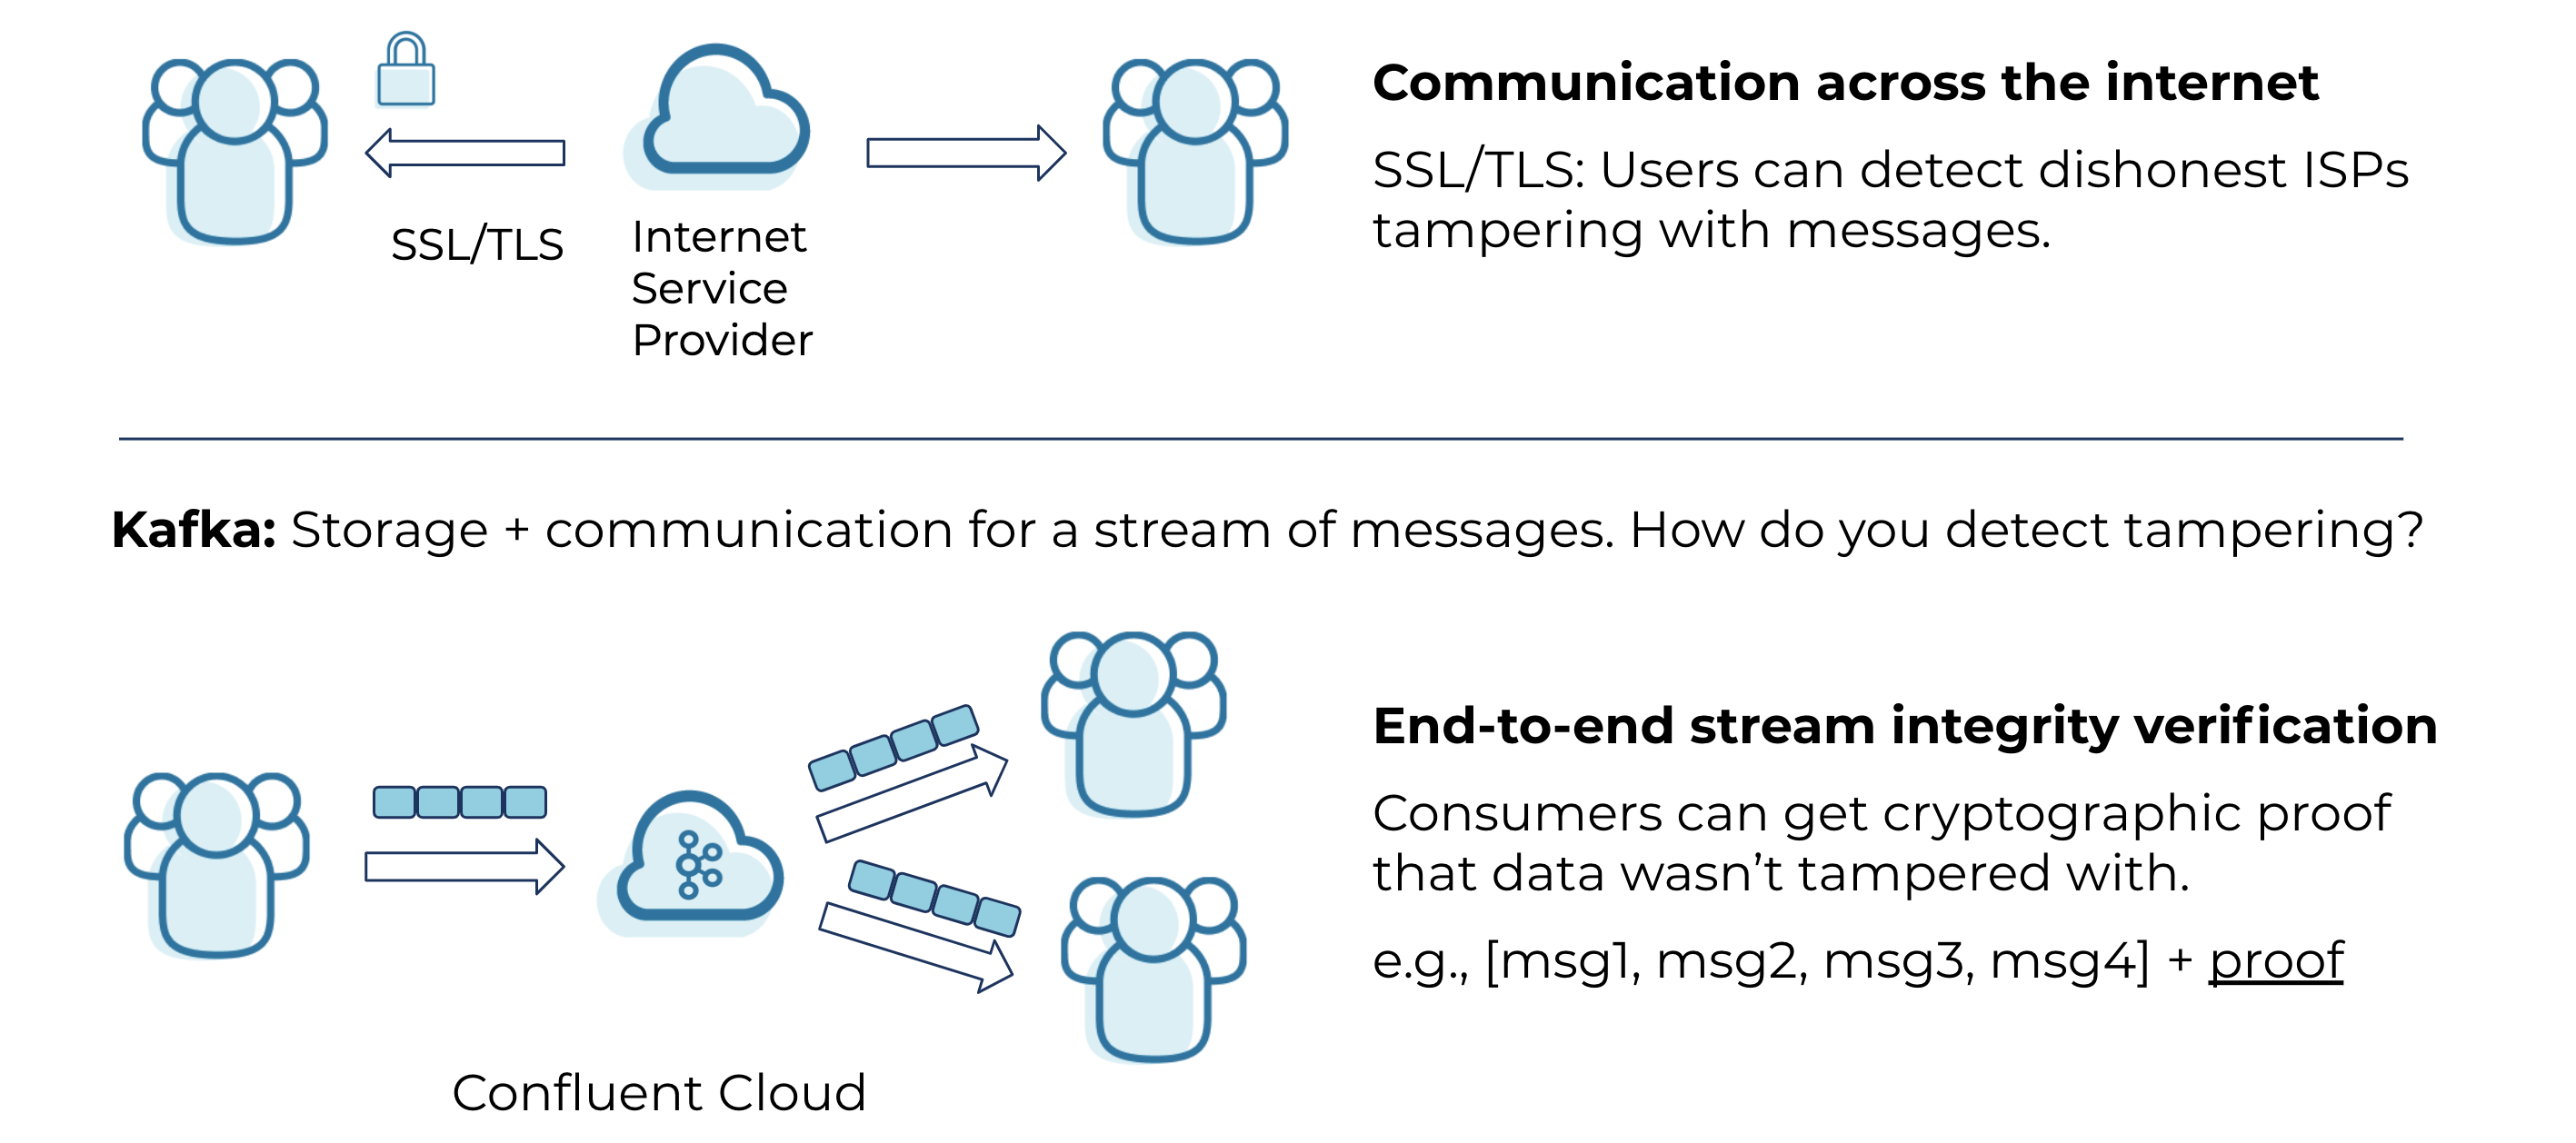 Communication across the internet | End-to-end stream integrity verification